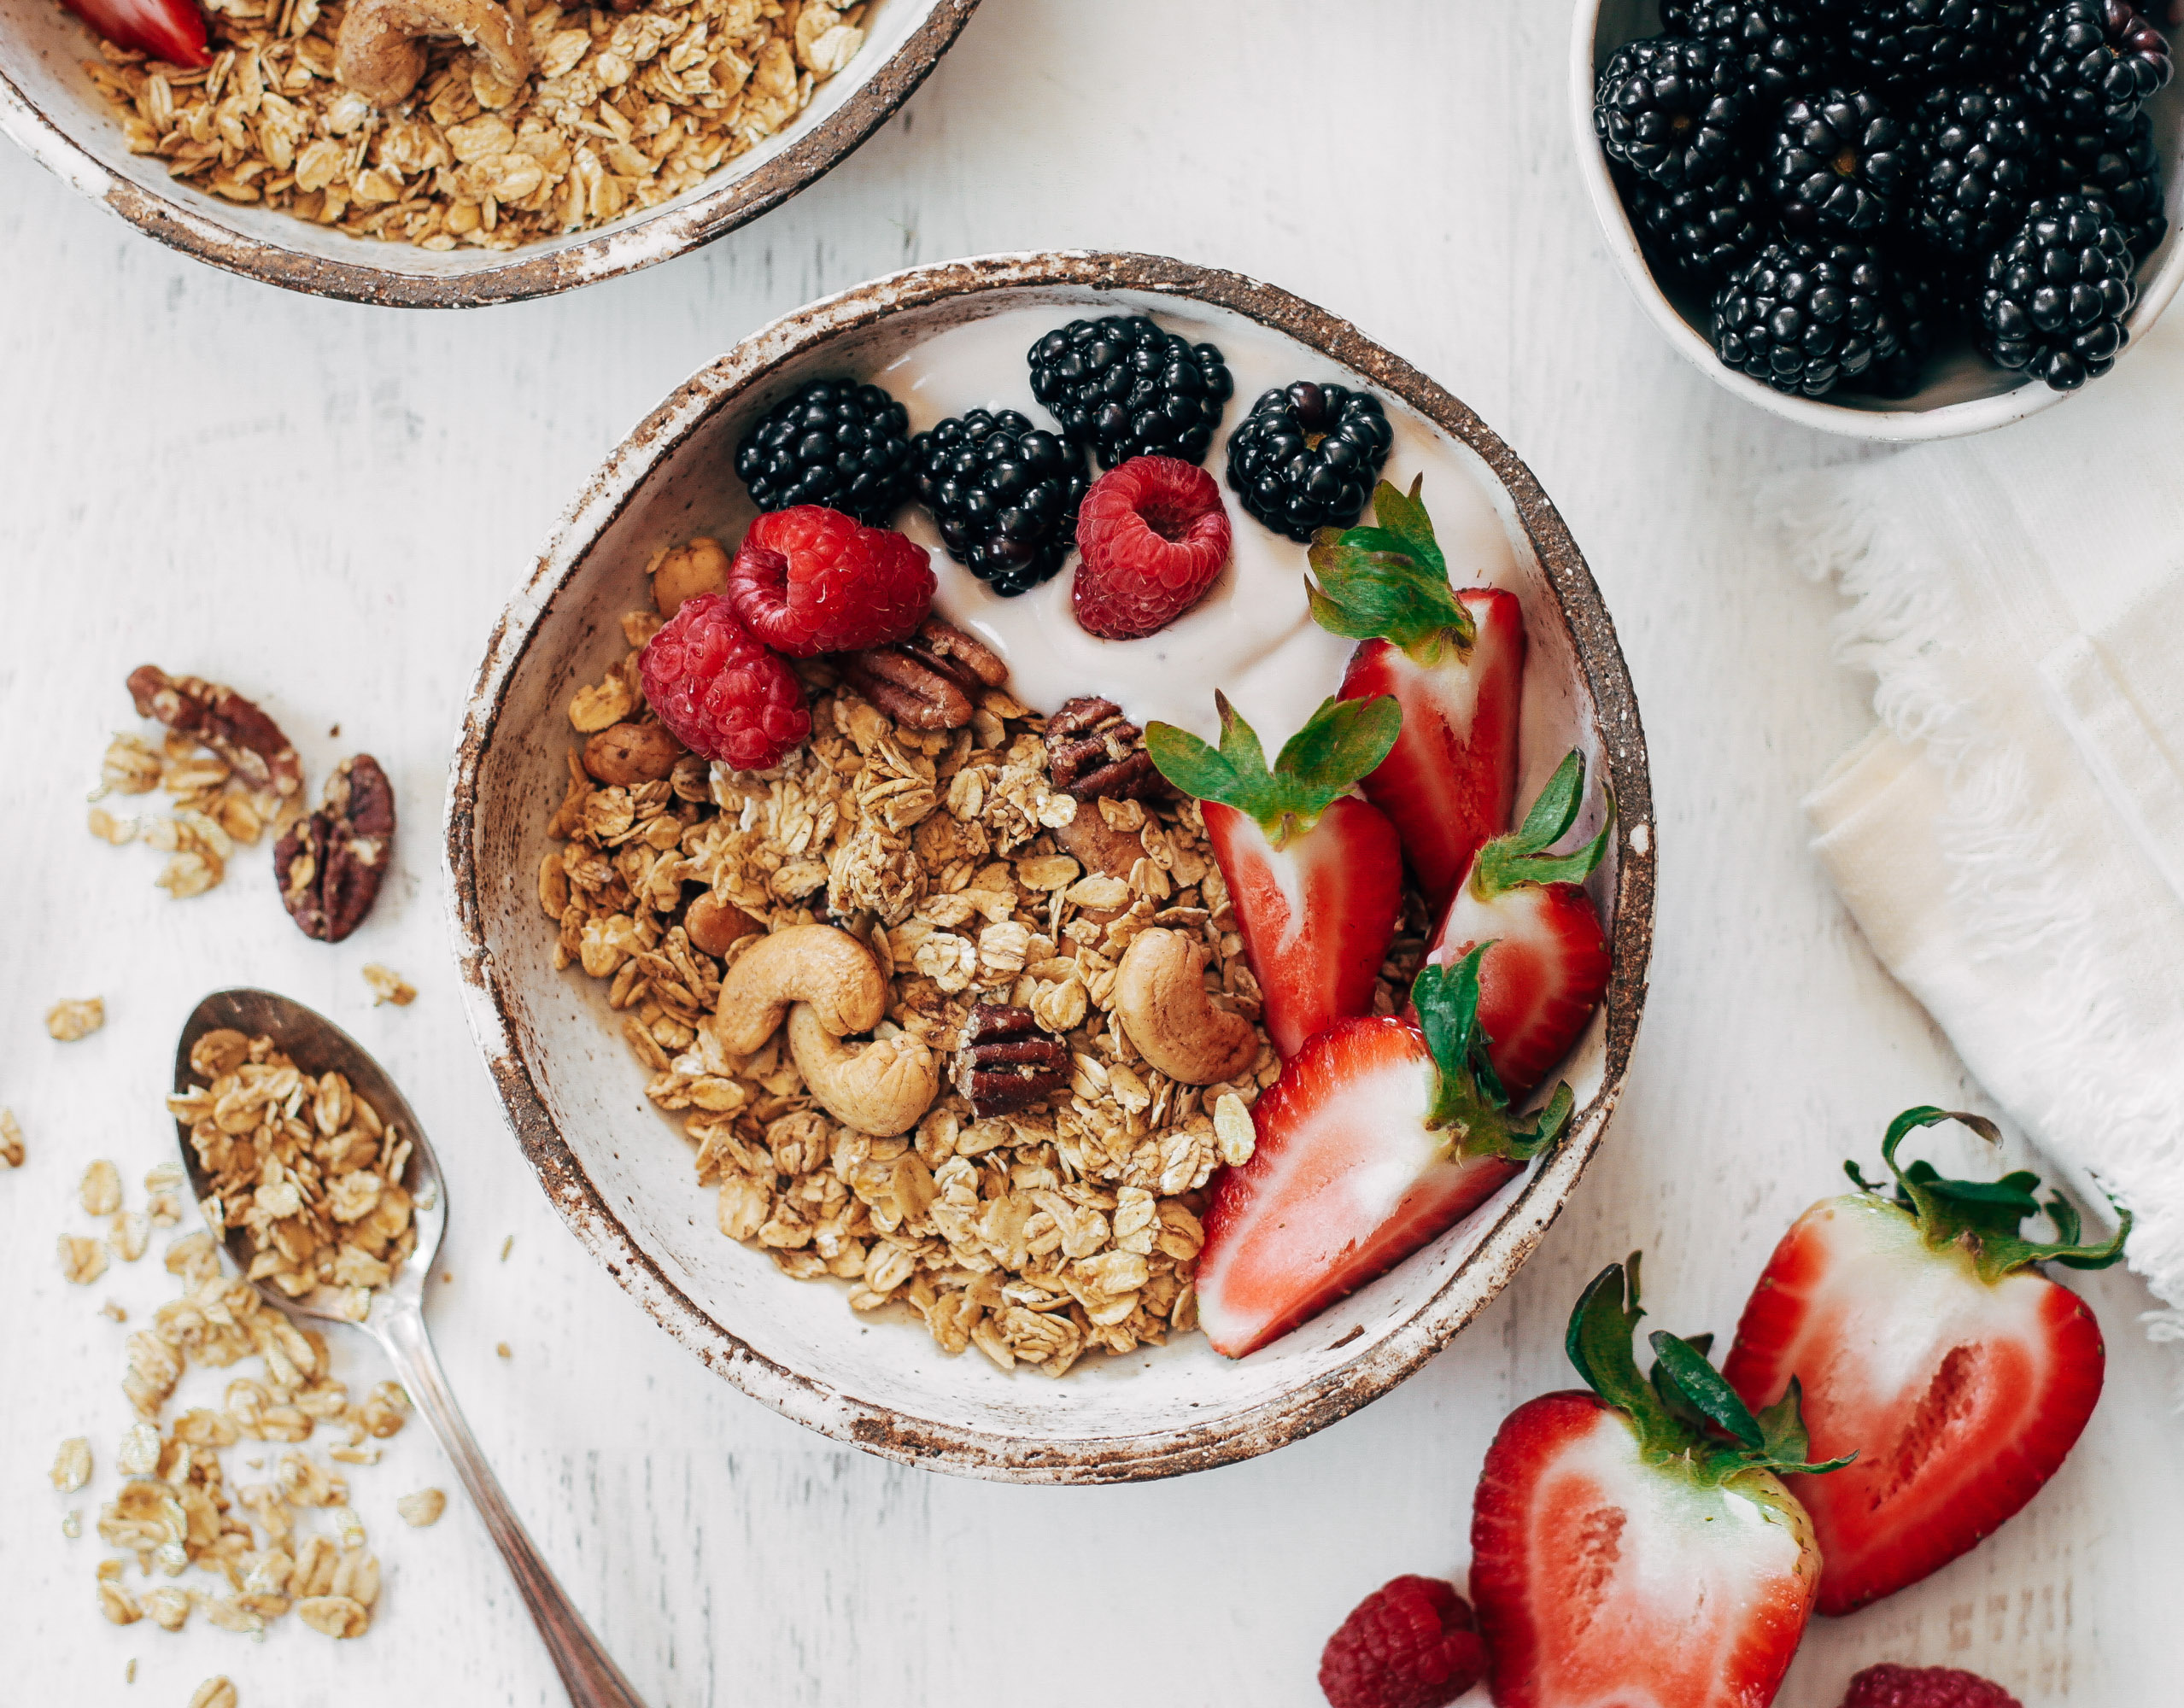 Healthy cinnamon pecan granola made in the air fryer. In just a few minutes, you can have a bowl full of delicious gluten free granola and can serve it with almond or oat milk! Made with just a few ingredients and in just a few minutes, then it’s ready to go!